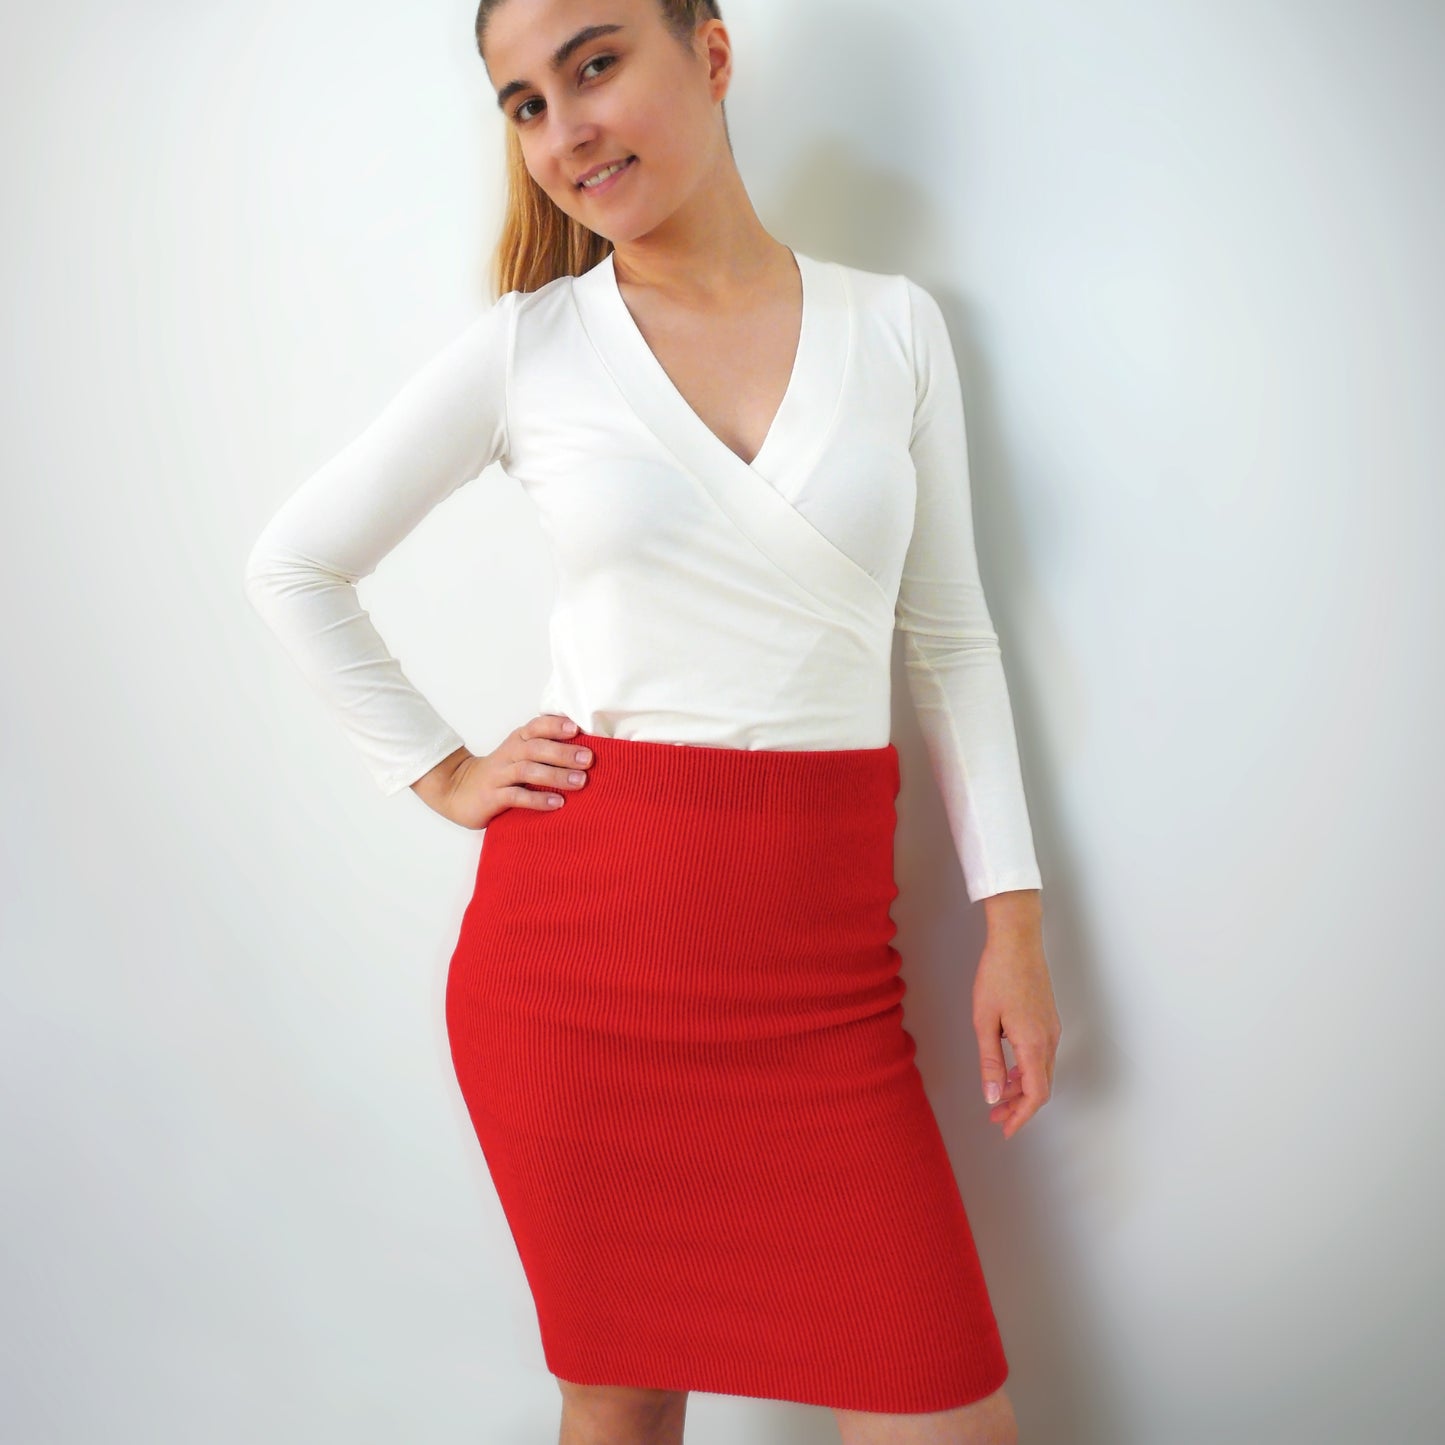 A woman posing in a red bodycon skirt and a long-sleeved, crossed-front top.